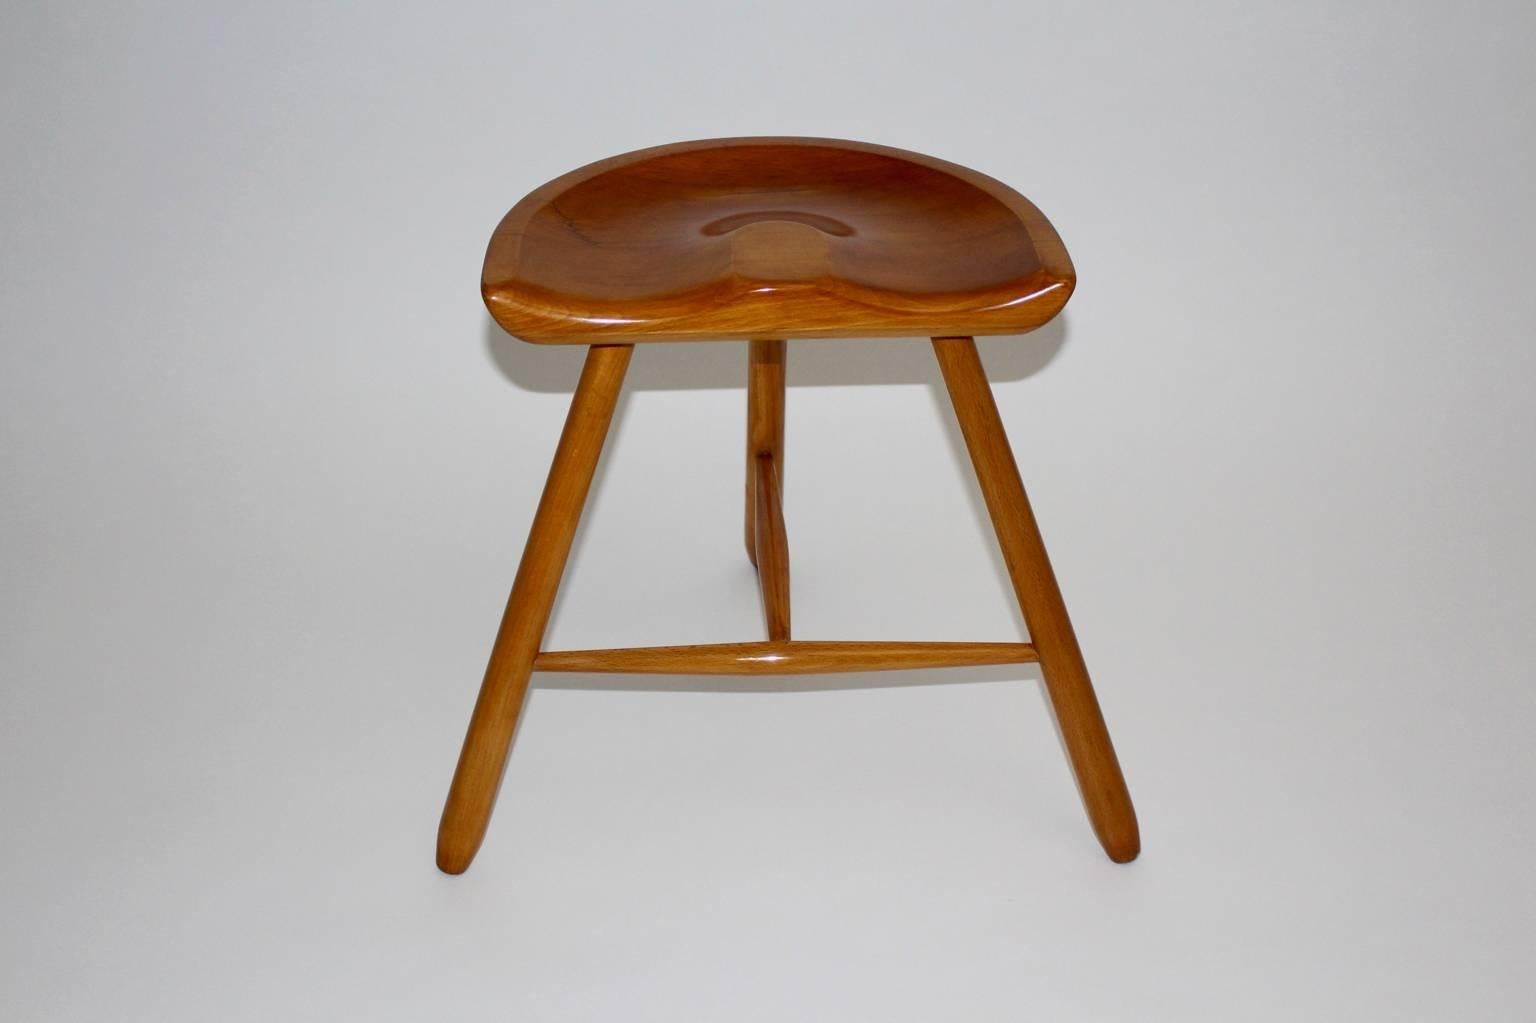 Art Deco vintage brown three-legged stool from solid maple tree. The beautiful stool with the warm brown tone features a saddle seat.
This stool is attributed to the Wiener Werkbund circa 1933, Vienna
Carefully cleaned and shellac hand-polished, so